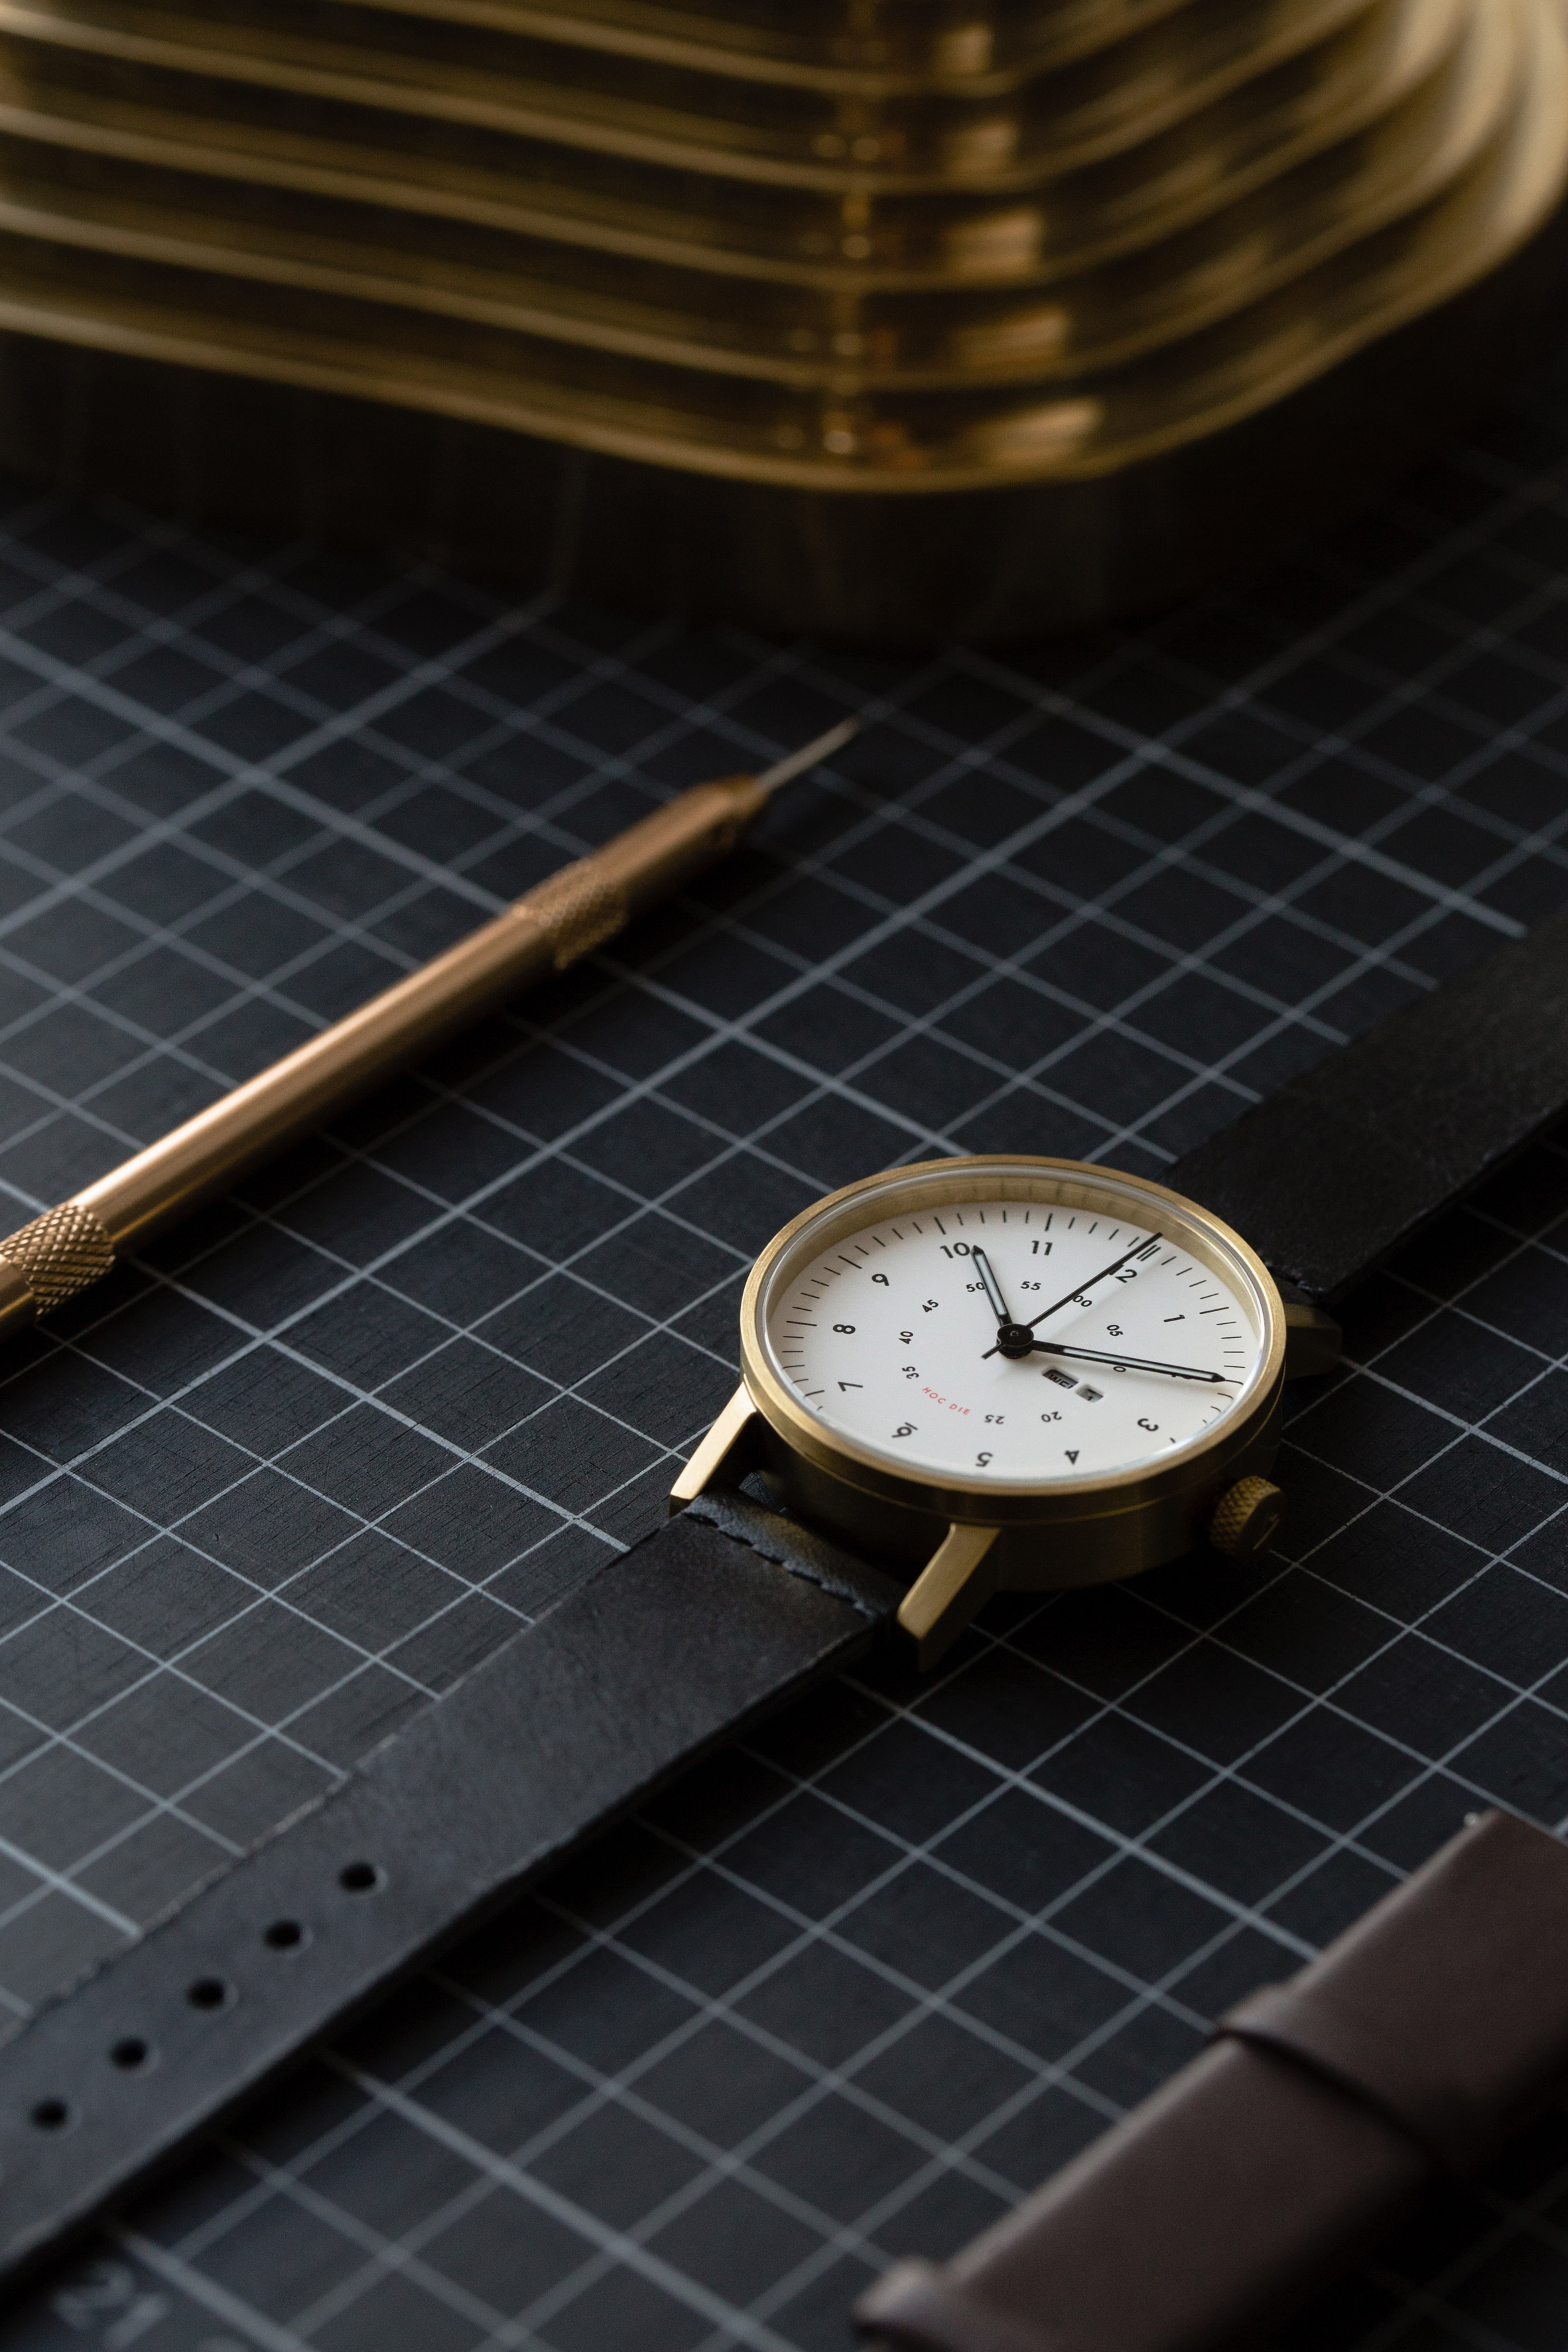 Dezeen has teamed up with Swedish brand Void Watches to give readers the chance to win one of five limited-edition V03W-365 timepieces.